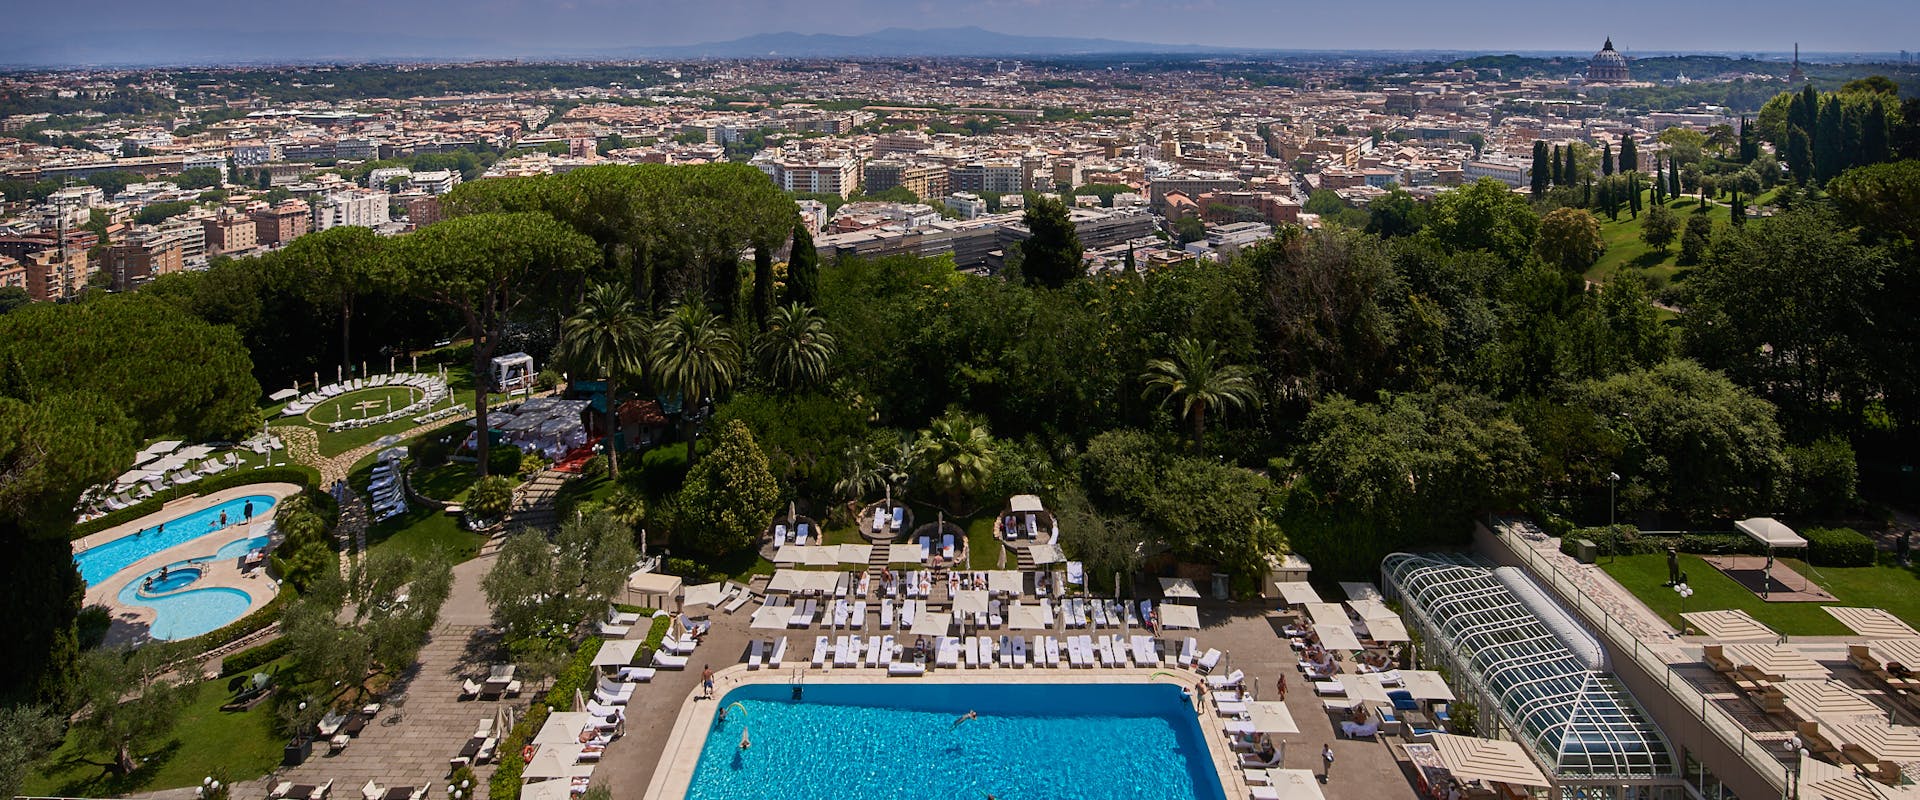 Rome Cavalieri, daytime view over Rome from the rooftop of the hotel